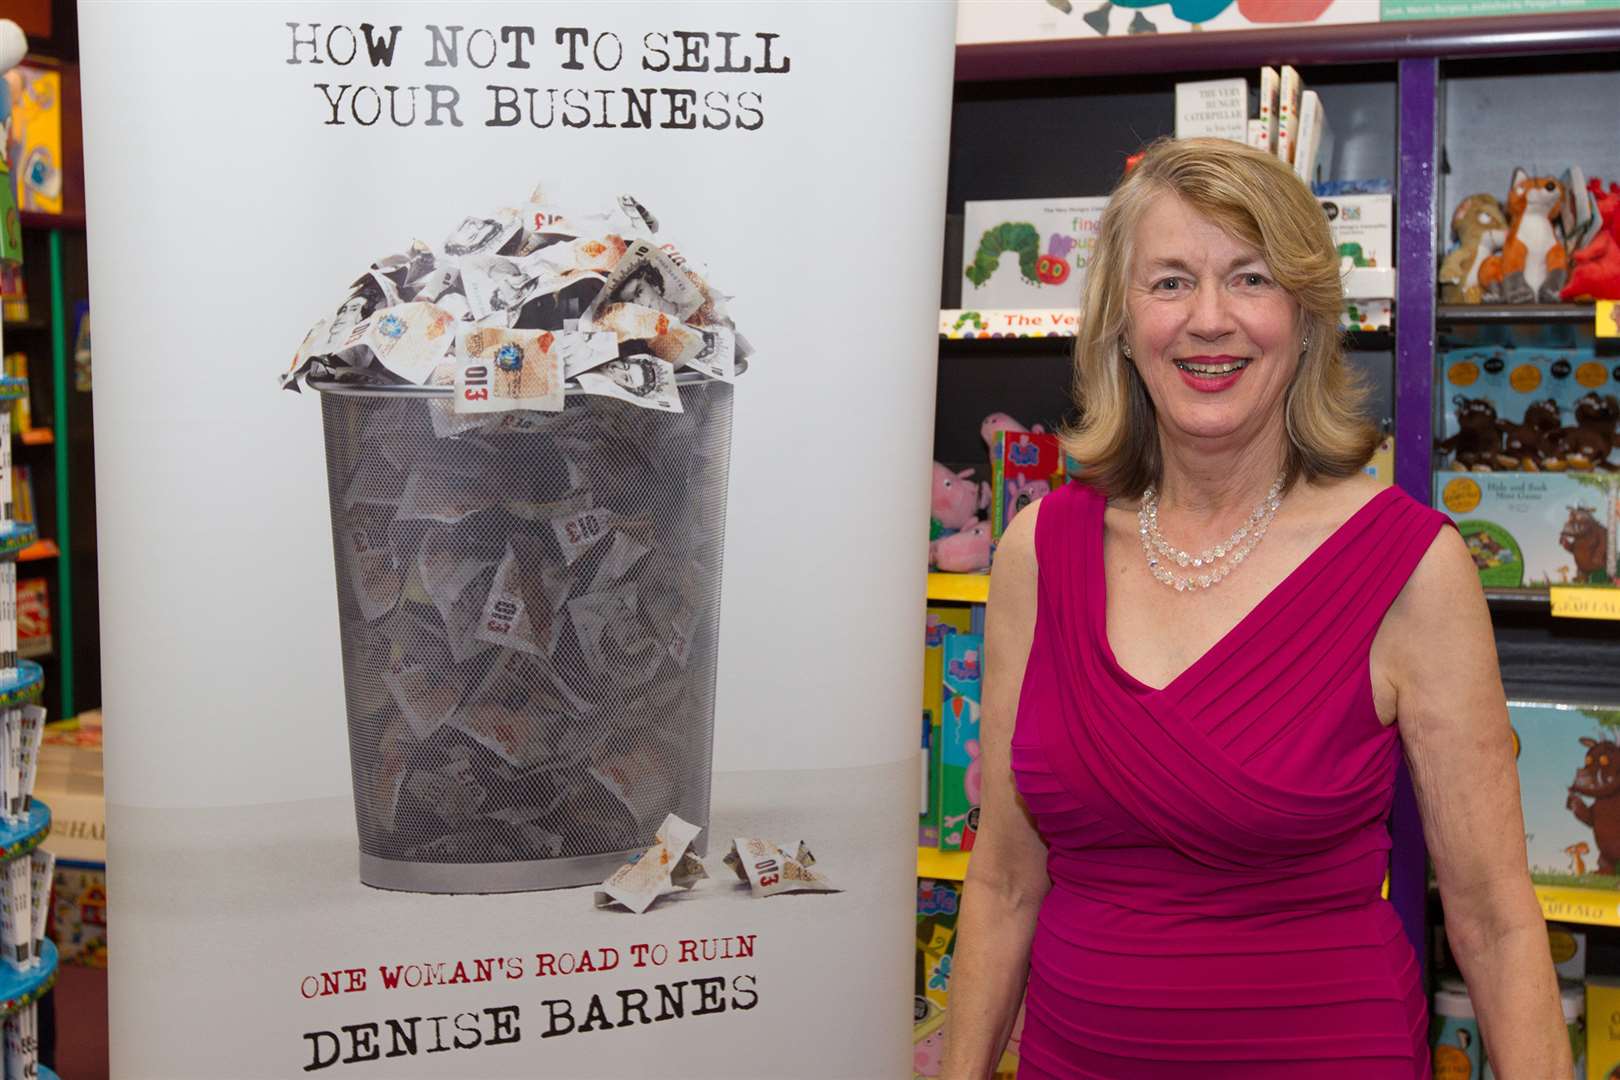 Denise Barnes at a book signing event in Waterstone's, Tunbridge Wells